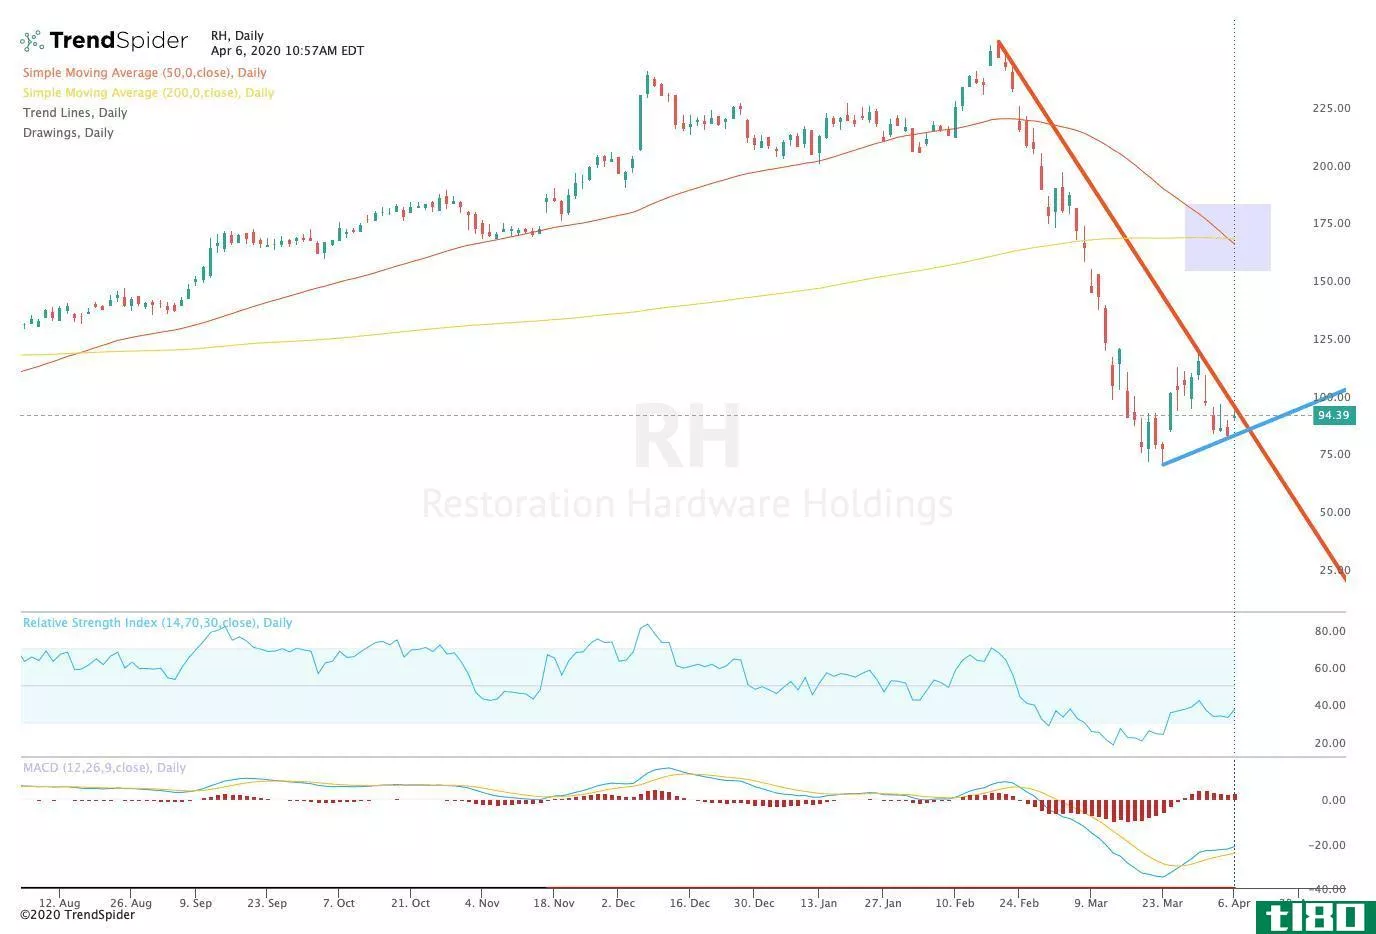 Chart showing the share price performance of RH (RH)